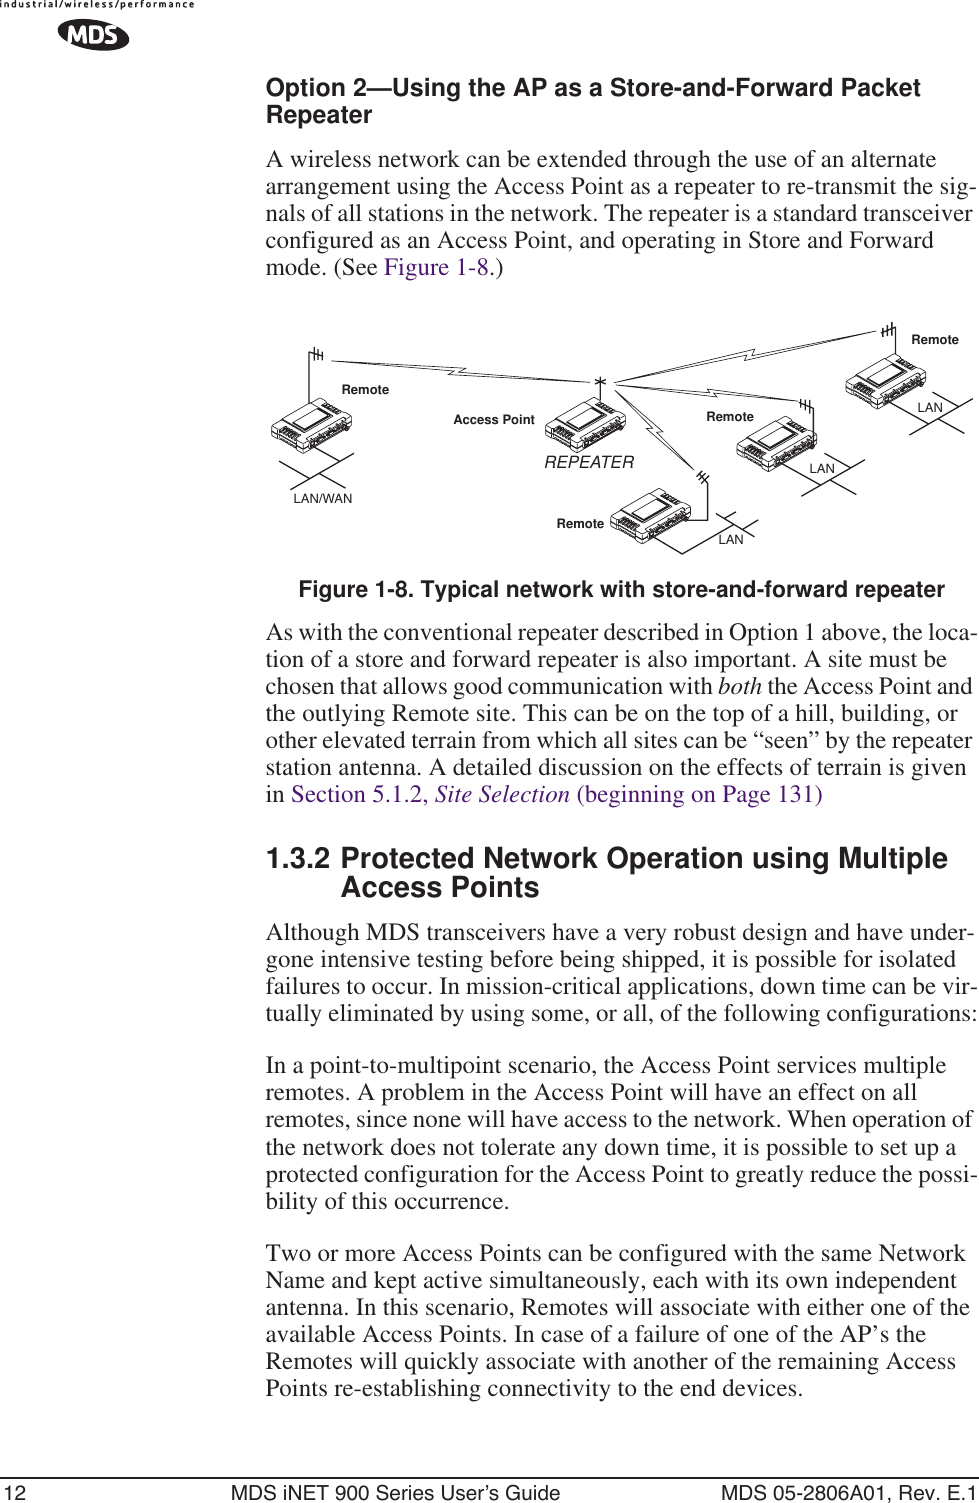 12 MDS iNET 900 Series User’s Guide MDS 05-2806A01, Rev. E.1Option 2—Using the AP as a Store-and-Forward Packet RepeaterA wireless network can be extended through the use of an alternate arrangement using the Access Point as a repeater to re-transmit the sig-nals of all stations in the network. The repeater is a standard transceiver configured as an Access Point, and operating in Store and Forward mode. (See Figure 1-8.)Invisible place holderFigure 1-8. Typical network with store-and-forward repeaterAs with the conventional repeater described in Option 1 above, the loca-tion of a store and forward repeater is also important. A site must be chosen that allows good communication with both the Access Point and the outlying Remote site. This can be on the top of a hill, building, or other elevated terrain from which all sites can be “seen” by the repeater station antenna. A detailed discussion on the effects of terrain is given in Section 5.1.2, Site Selection (beginning on Page 131)1.3.2 Protected Network Operation using Multiple Access PointsAlthough MDS transceivers have a very robust design and have under-gone intensive testing before being shipped, it is possible for isolated failures to occur. In mission-critical applications, down time can be vir-tually eliminated by using some, or all, of the following configurations:In a point-to-multipoint scenario, the Access Point services multiple remotes. A problem in the Access Point will have an effect on all remotes, since none will have access to the network. When operation of the network does not tolerate any down time, it is possible to set up a protected configuration for the Access Point to greatly reduce the possi-bility of this occurrence.Two or more Access Points can be configured with the same Network Name and kept active simultaneously, each with its own independent antenna. In this scenario, Remotes will associate with either one of the available Access Points. In case of a failure of one of the AP’s the Remotes will quickly associate with another of the remaining Access Points re-establishing connectivity to the end devices.RemoteRemoteRemoteRemoteAccess PointLAN/WANREPEATERLANLANLAN